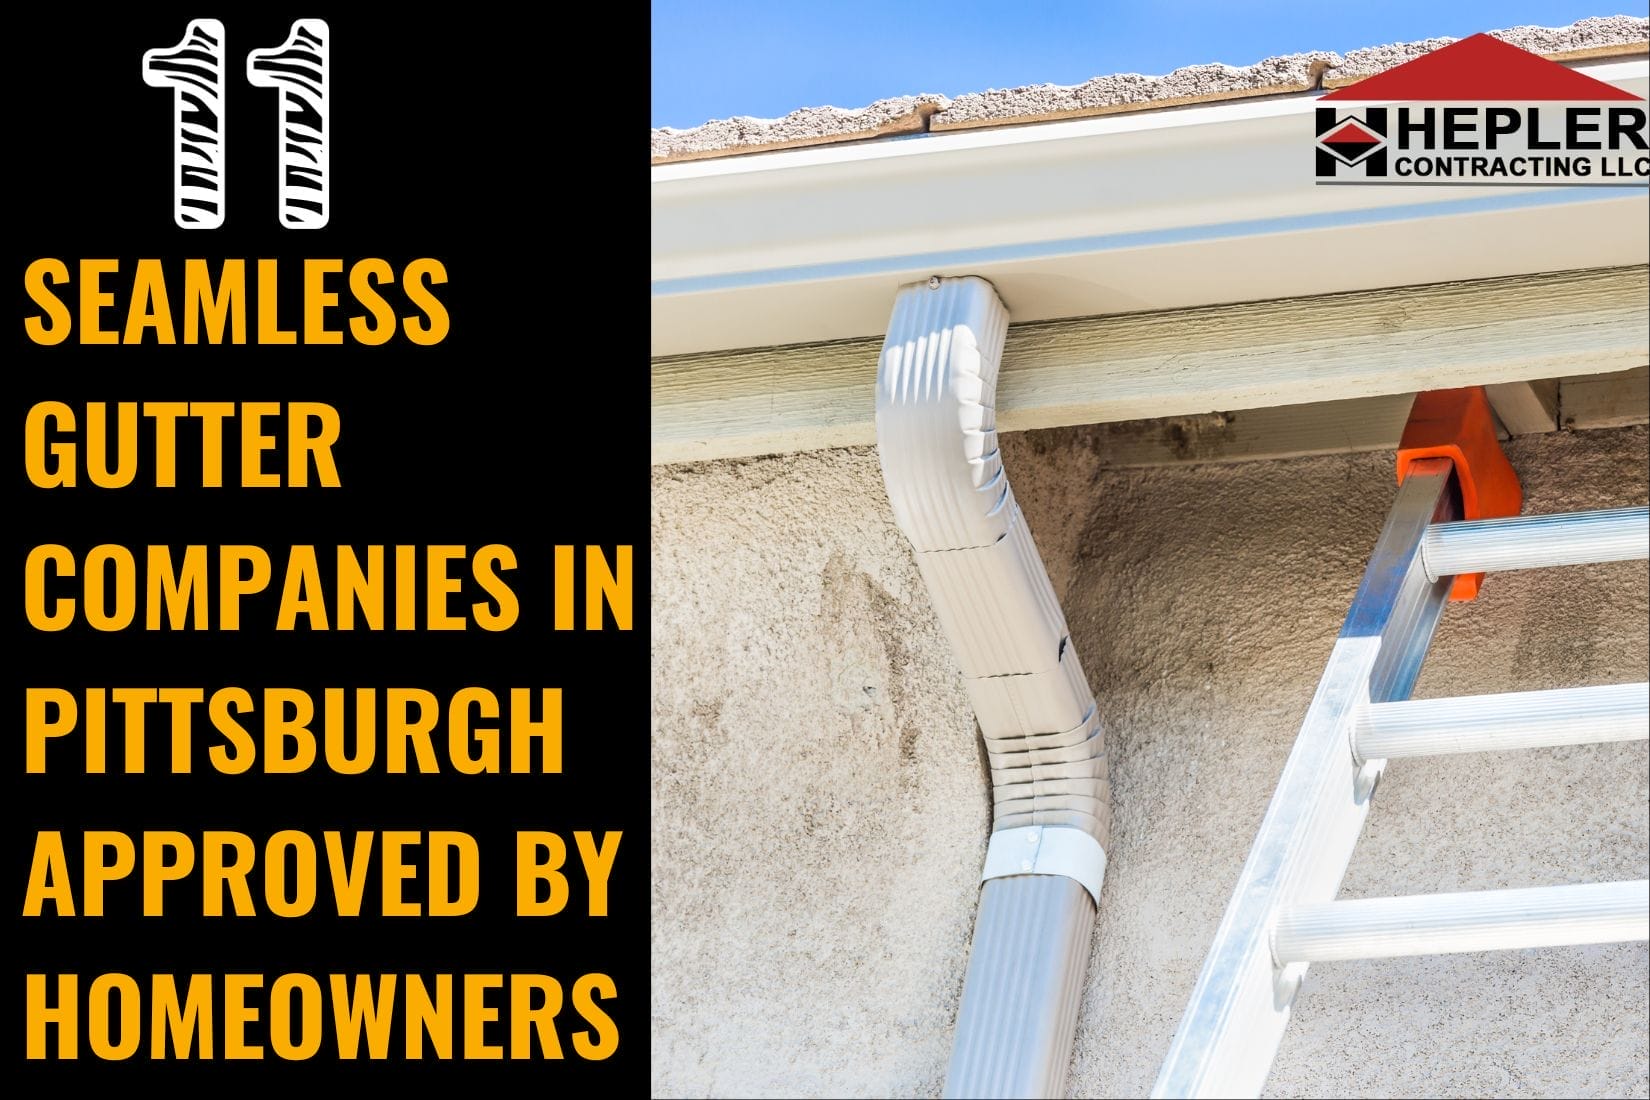 11 Seamless Gutter Companies In Pittsburgh Approved By Homeowners